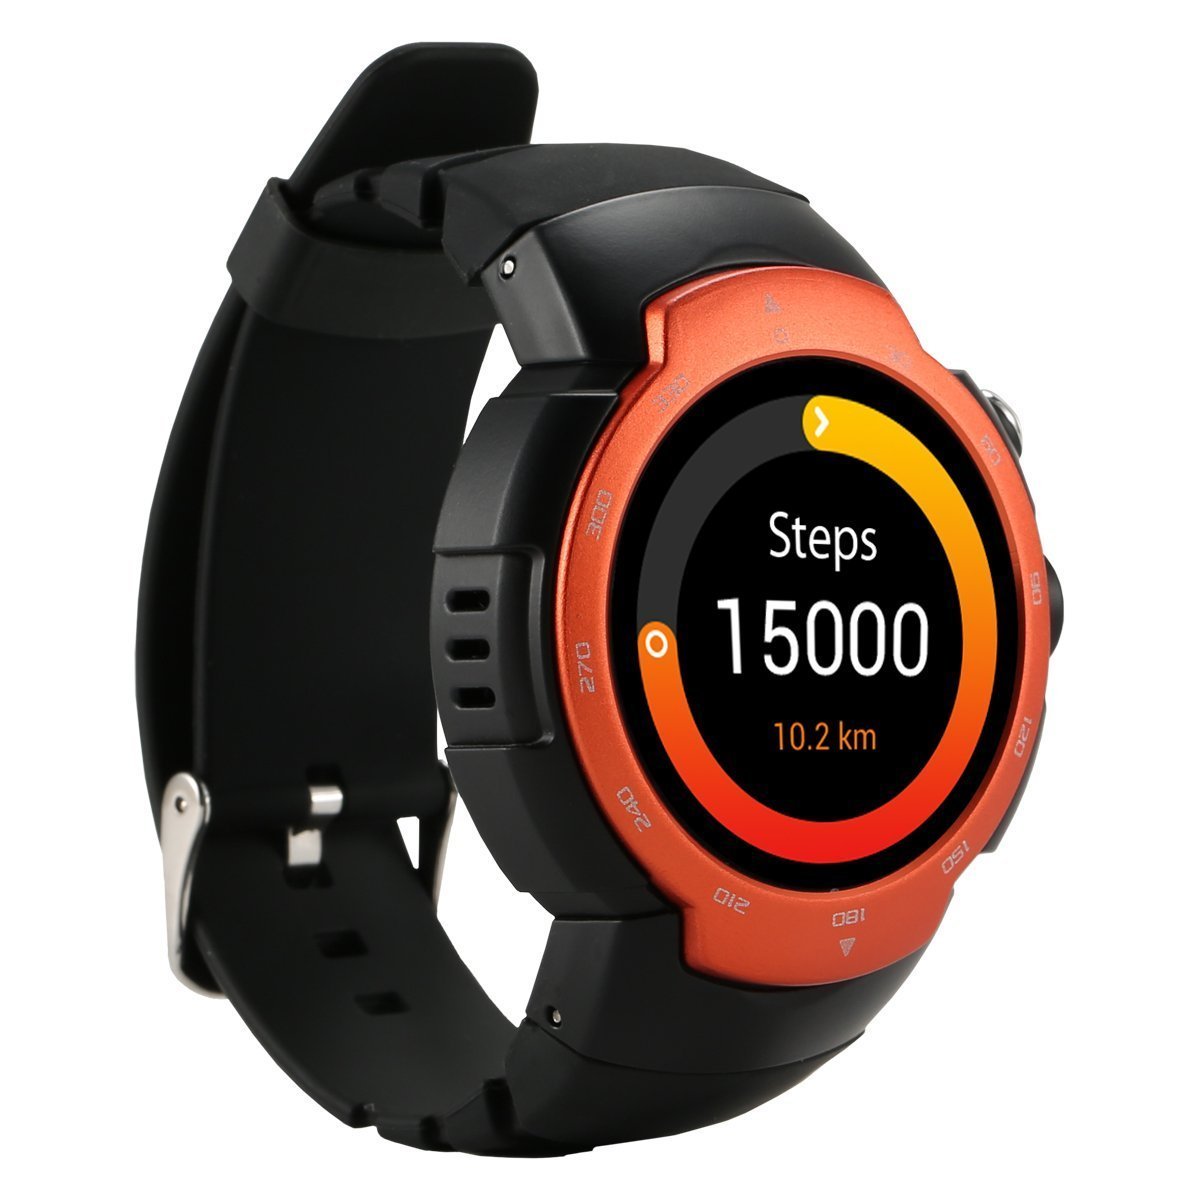 Z9 3G wifi Smart Watch phone Android 5.1 OS MTK6580 Quad Core Support google map Heart Rate Monitoring